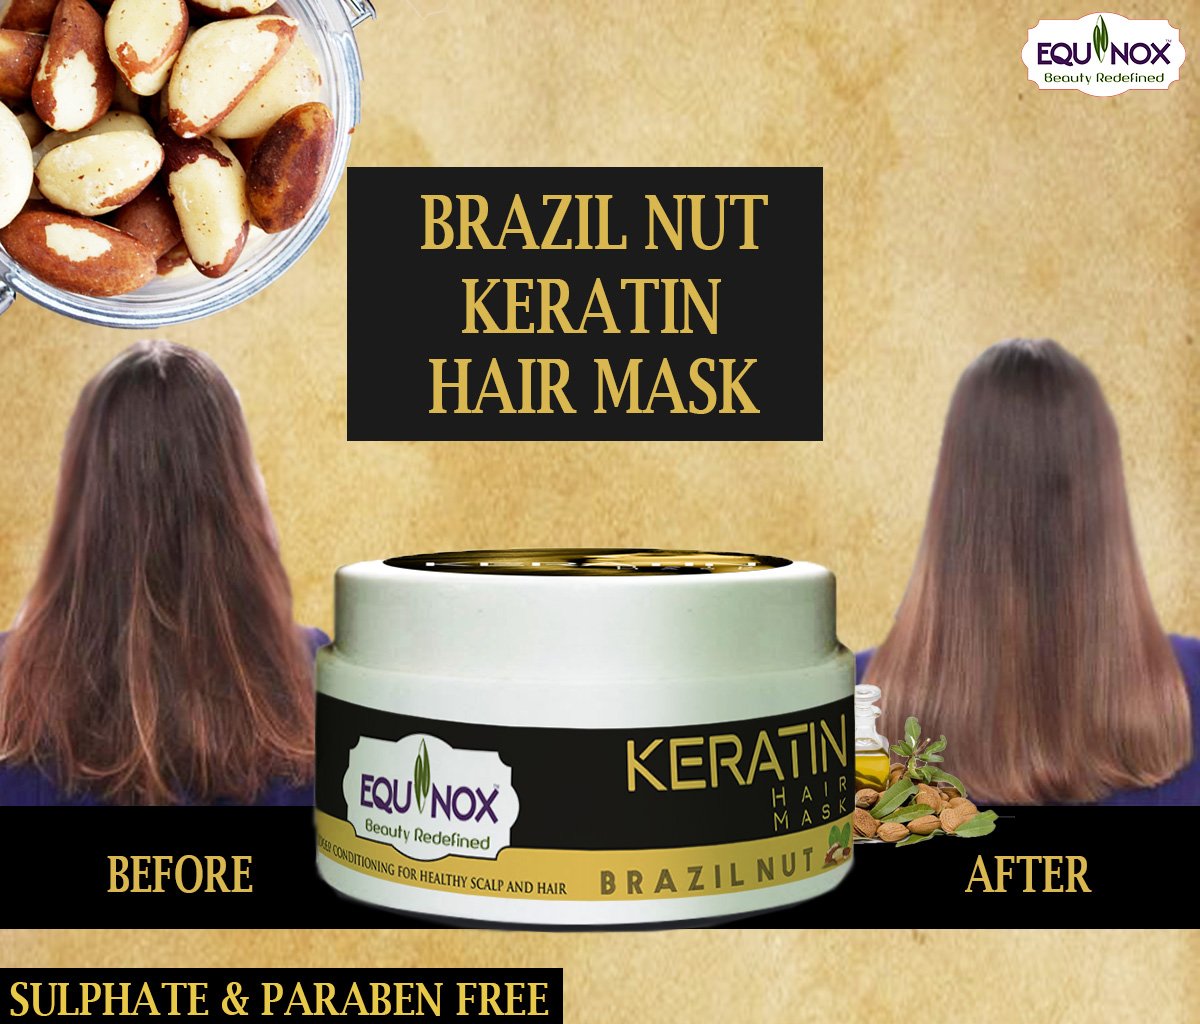 This is how 'Keratin Brazil Nut Hair Mask' works on your hair😍
#equinox #keratinhairmask #haircare #hairproducts #personalcareproducts